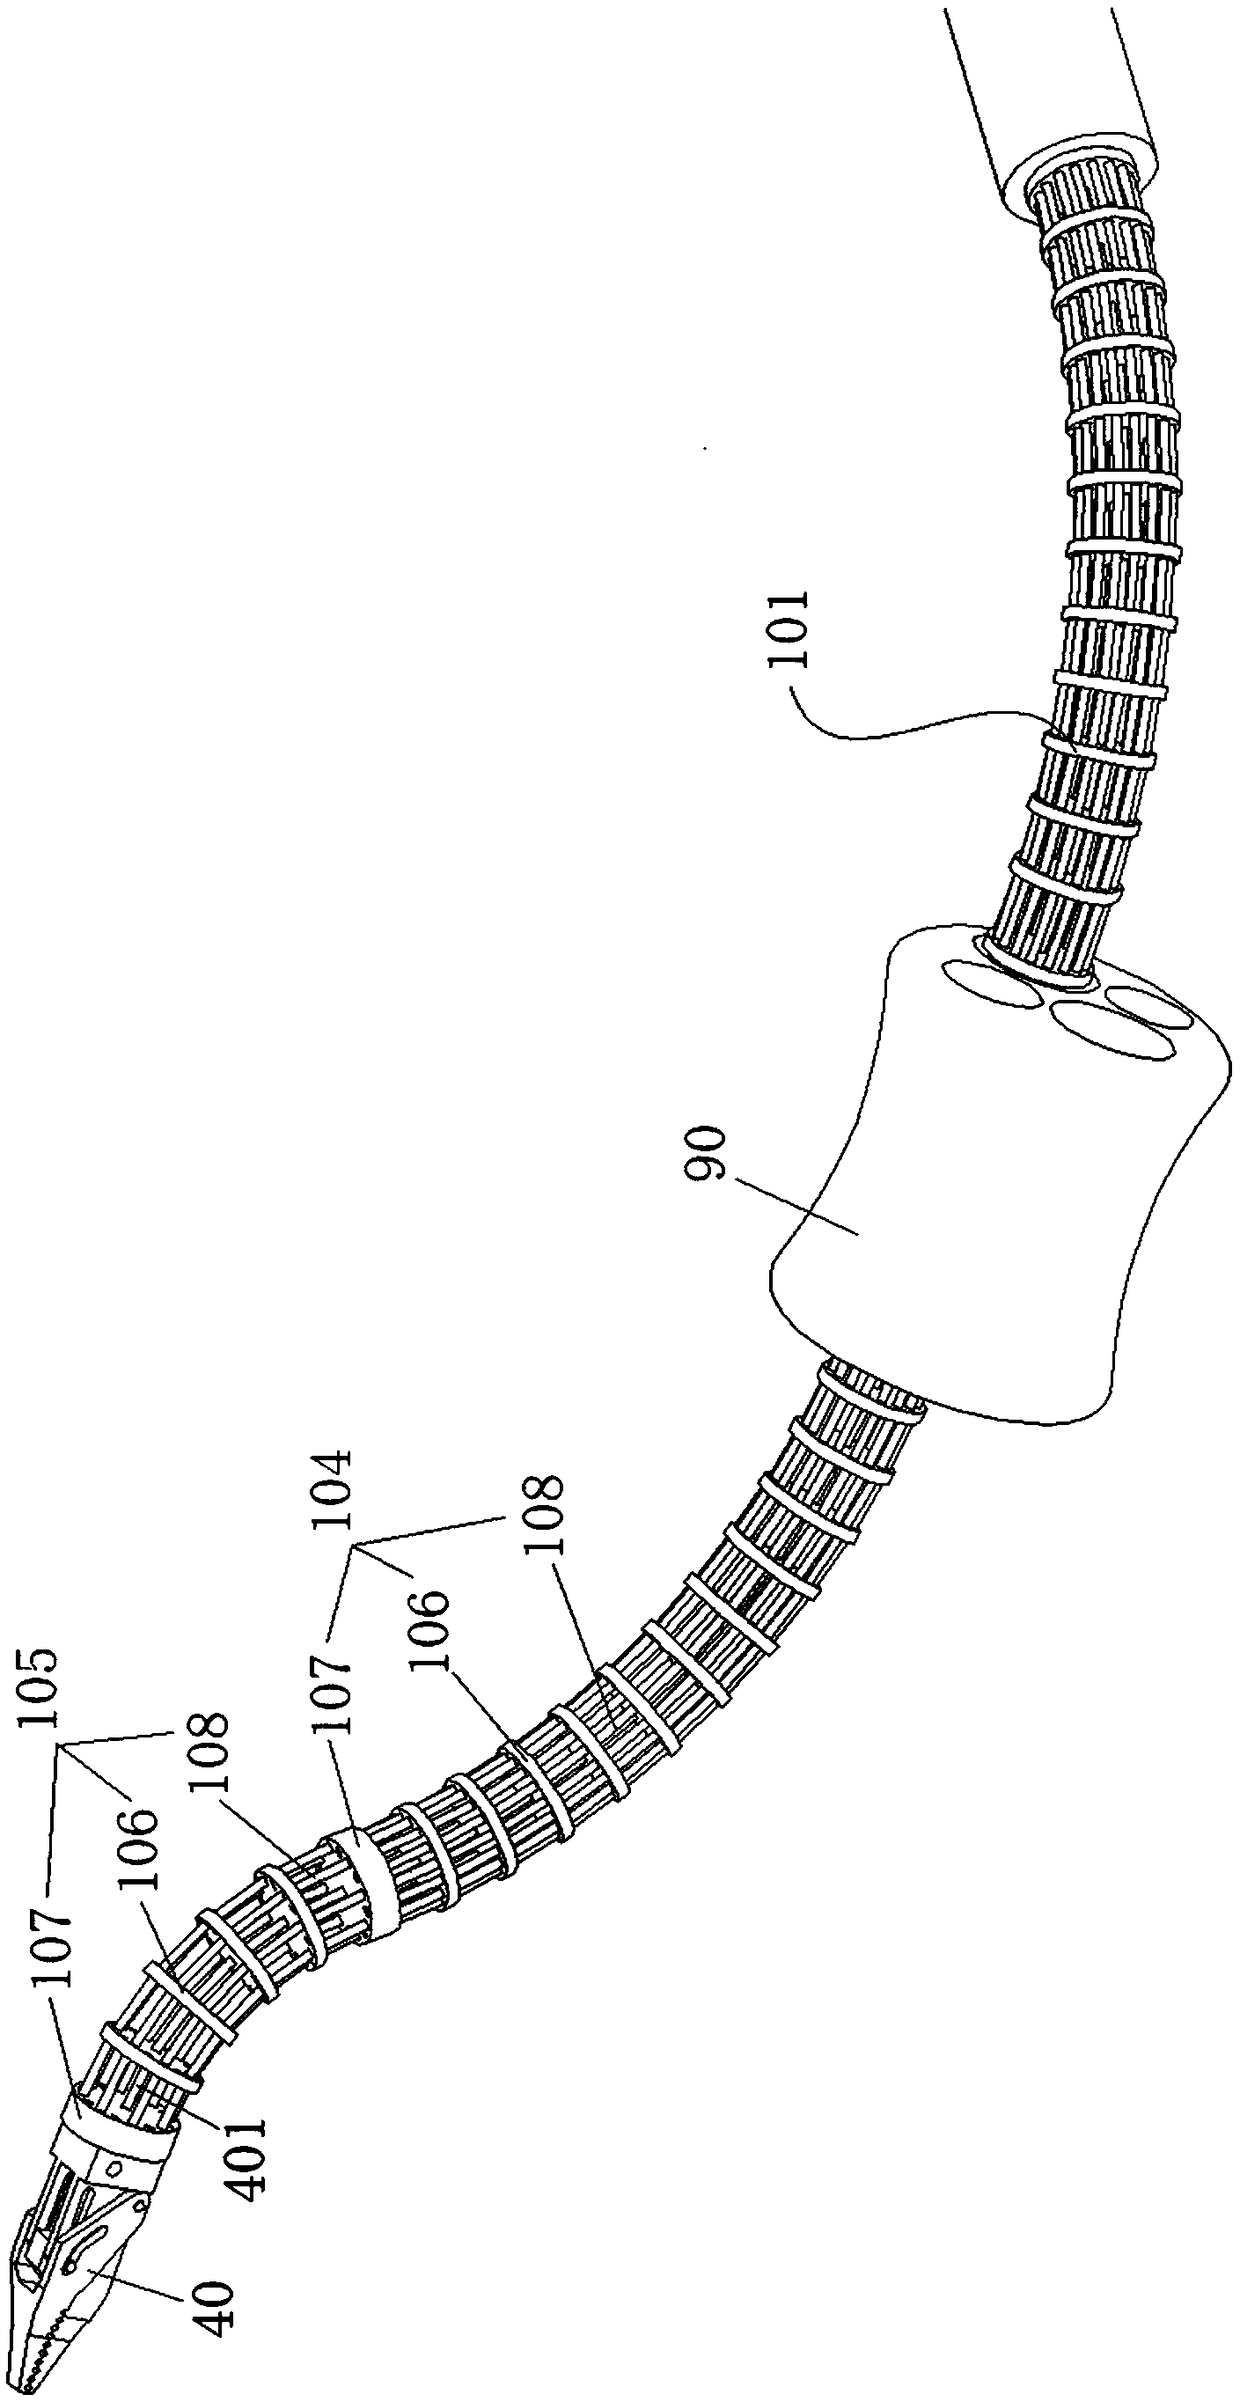 A flexible surgical tool system with drive input front